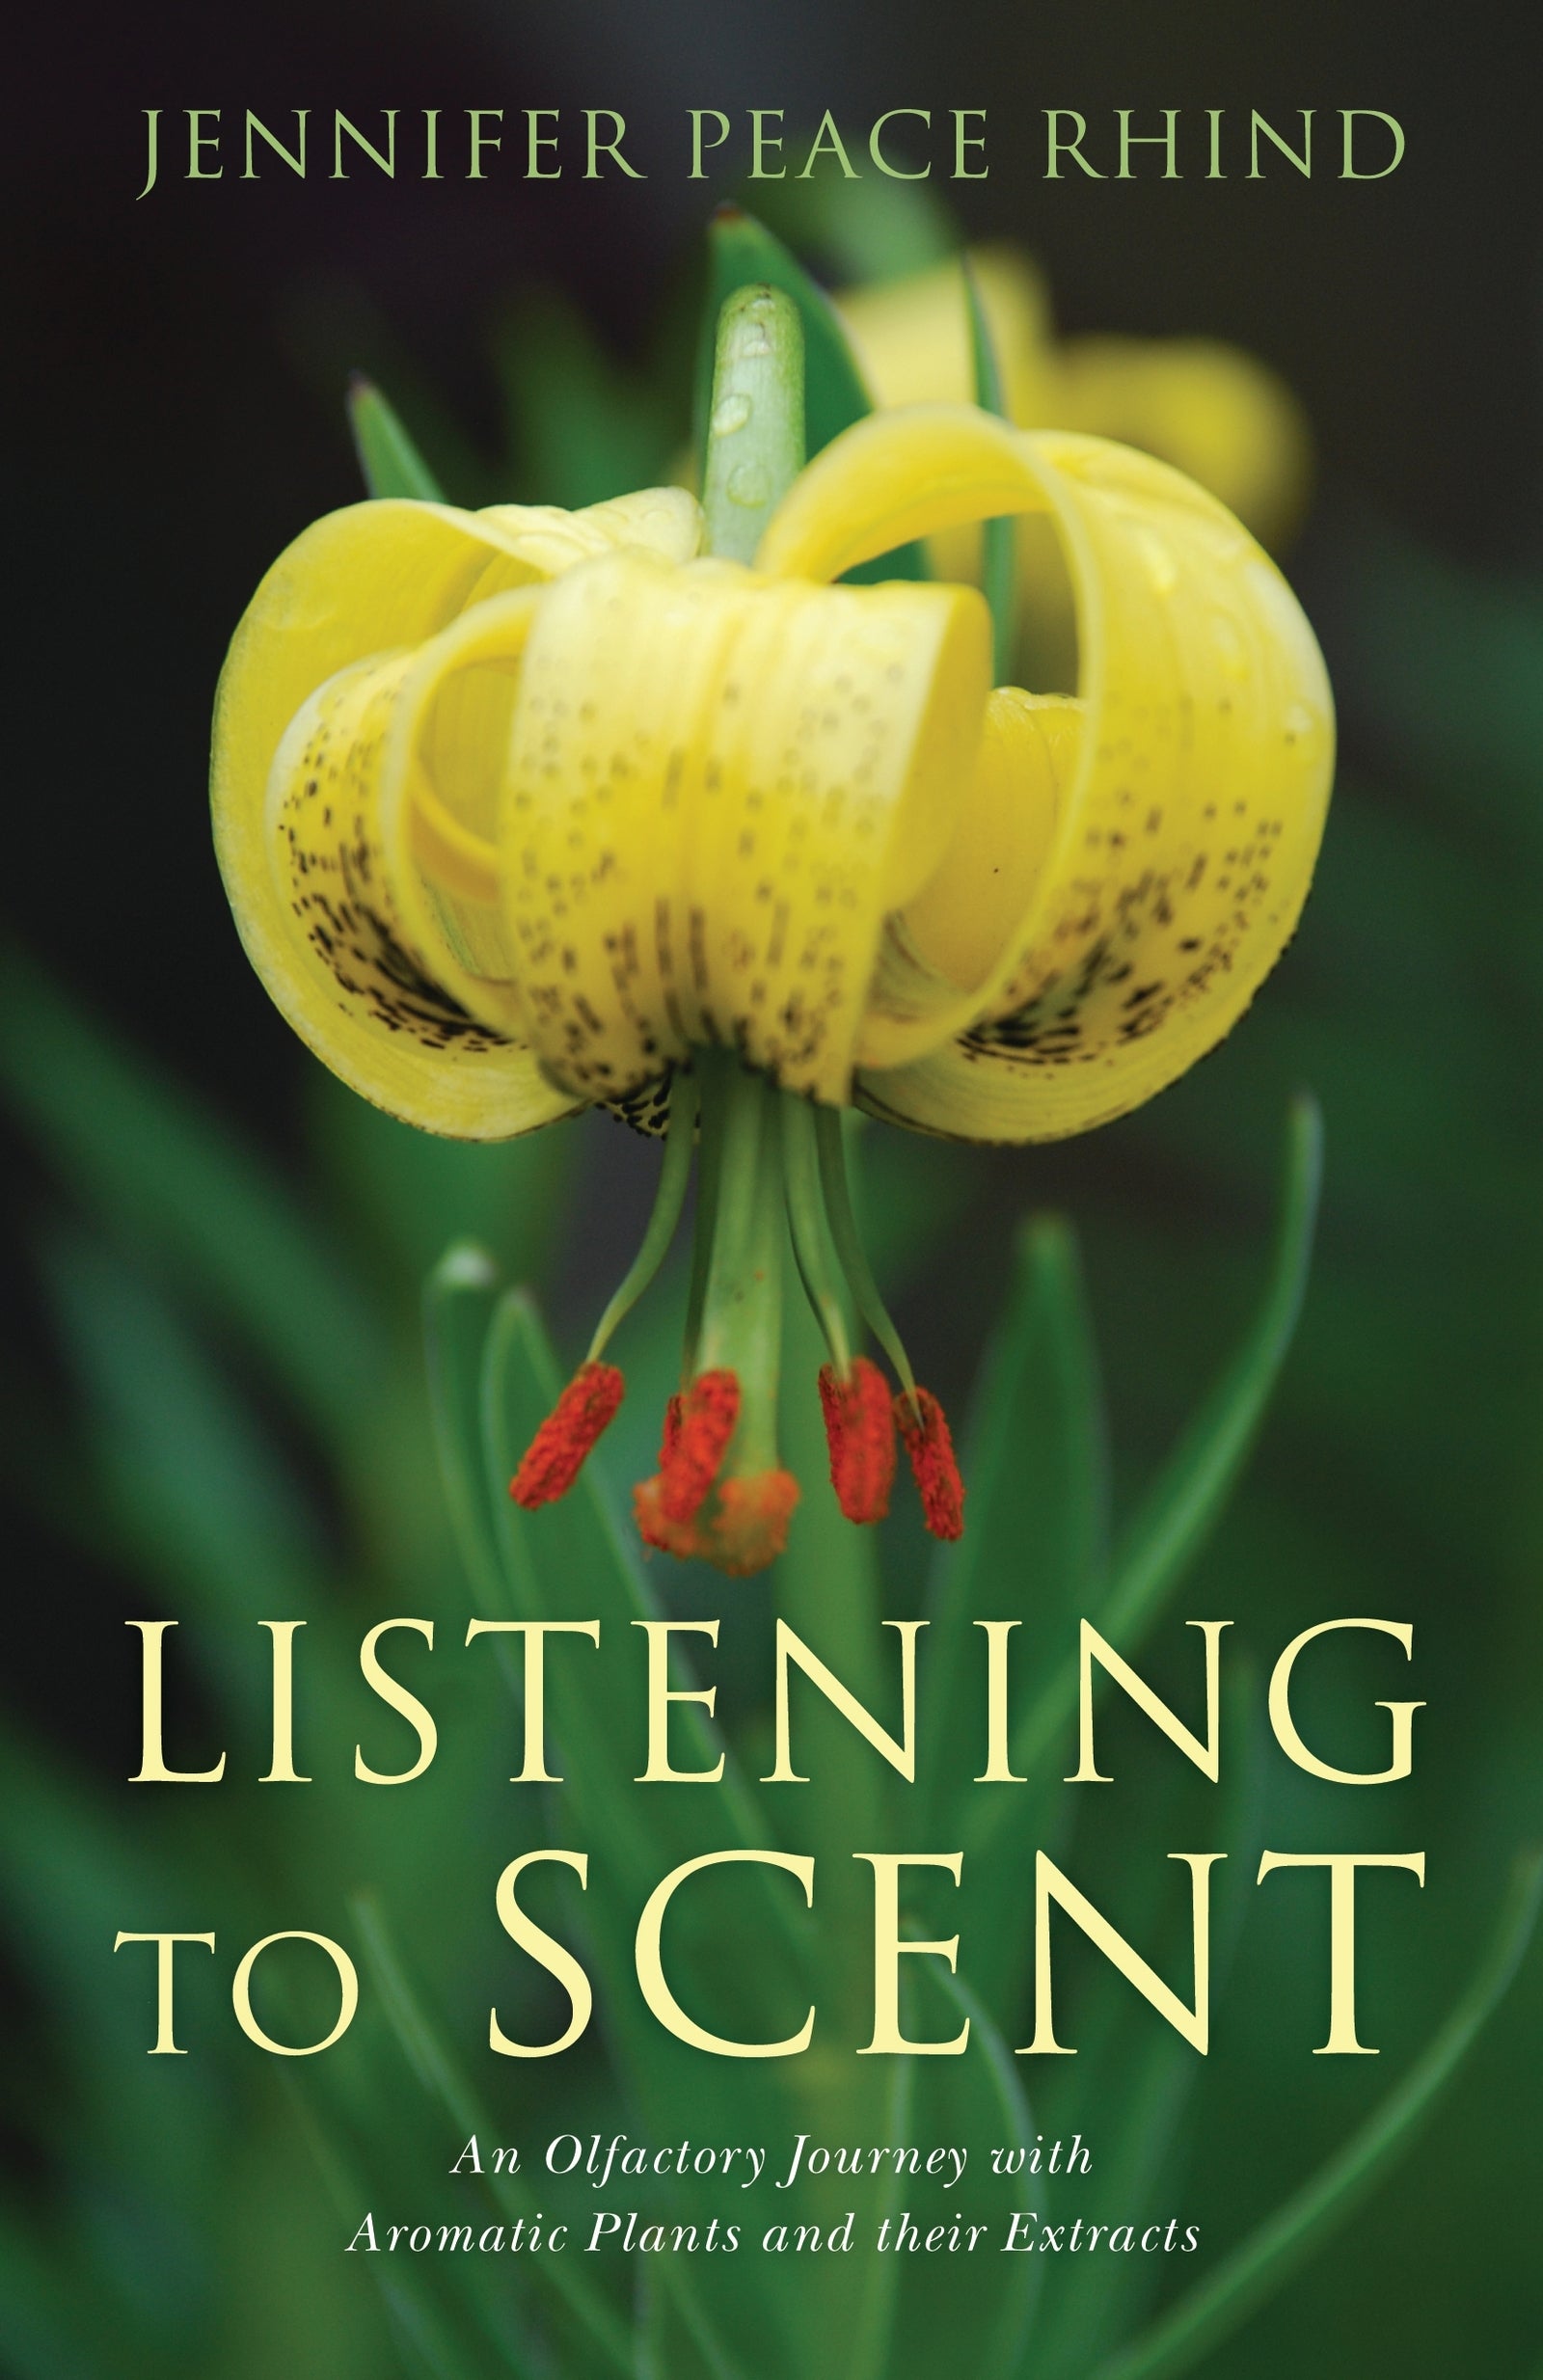 Listening to Scent by Jennifer Peace Peace Rhind